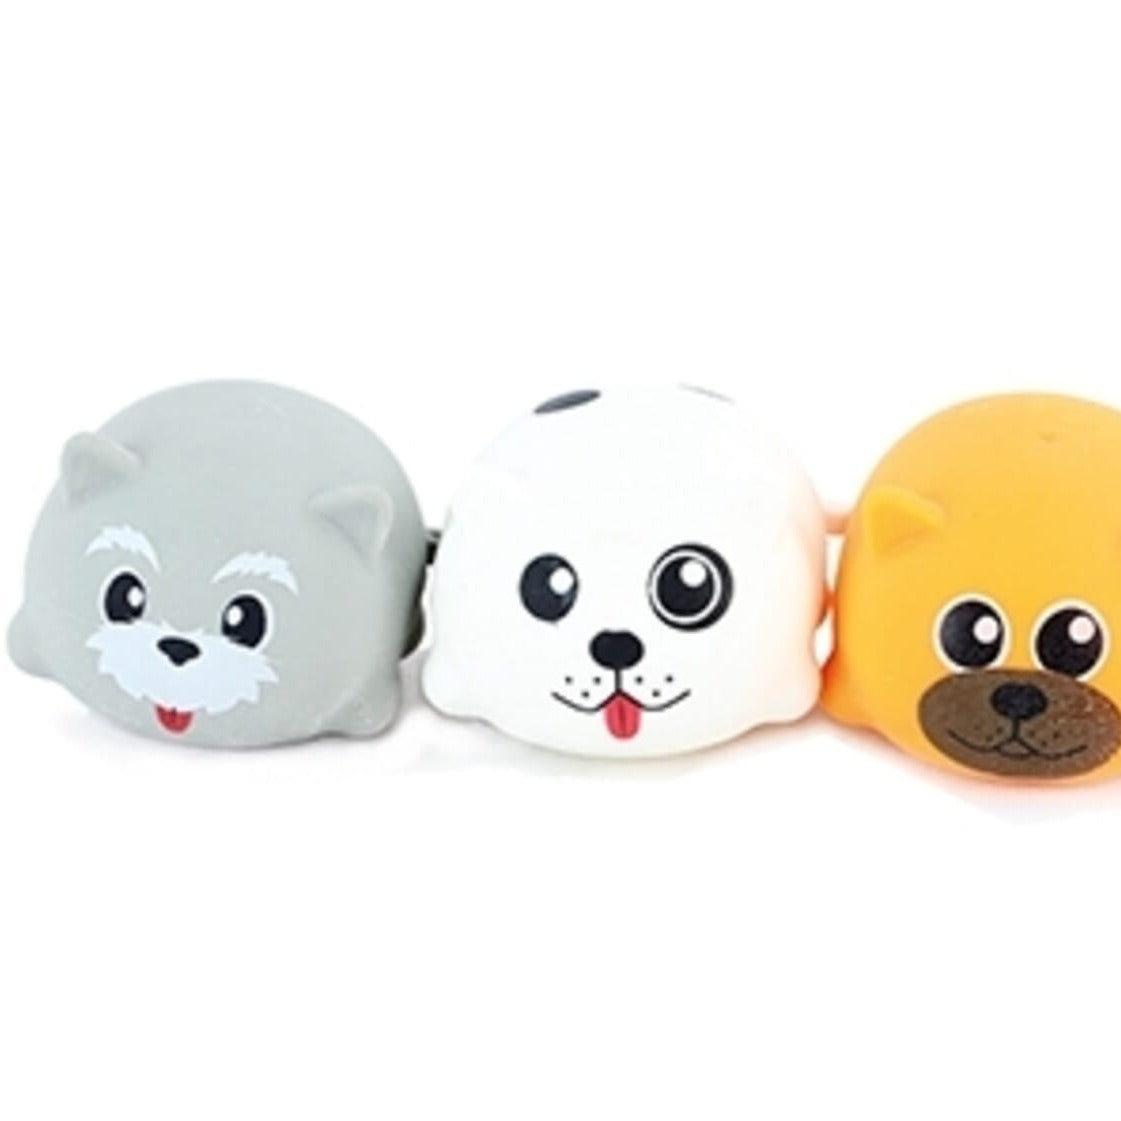 Squidgy Puppies, This Squidgy Puppy fidget toy is crafted in the shape of a cute dog with big puppy eyes, and its small size makes it easy to carry around and squish whenever you need to relax. Made of high-quality, non-toxic material, this squeezy ball is perfect for playing with, squeezing, and releasing tension. Try this squidgy tactile puppy to squish your stress away! This puppy is a great way to relieve some stress when you squash and squeeze it in your hands. Colours will vary. Approx. 8cm. Light wei